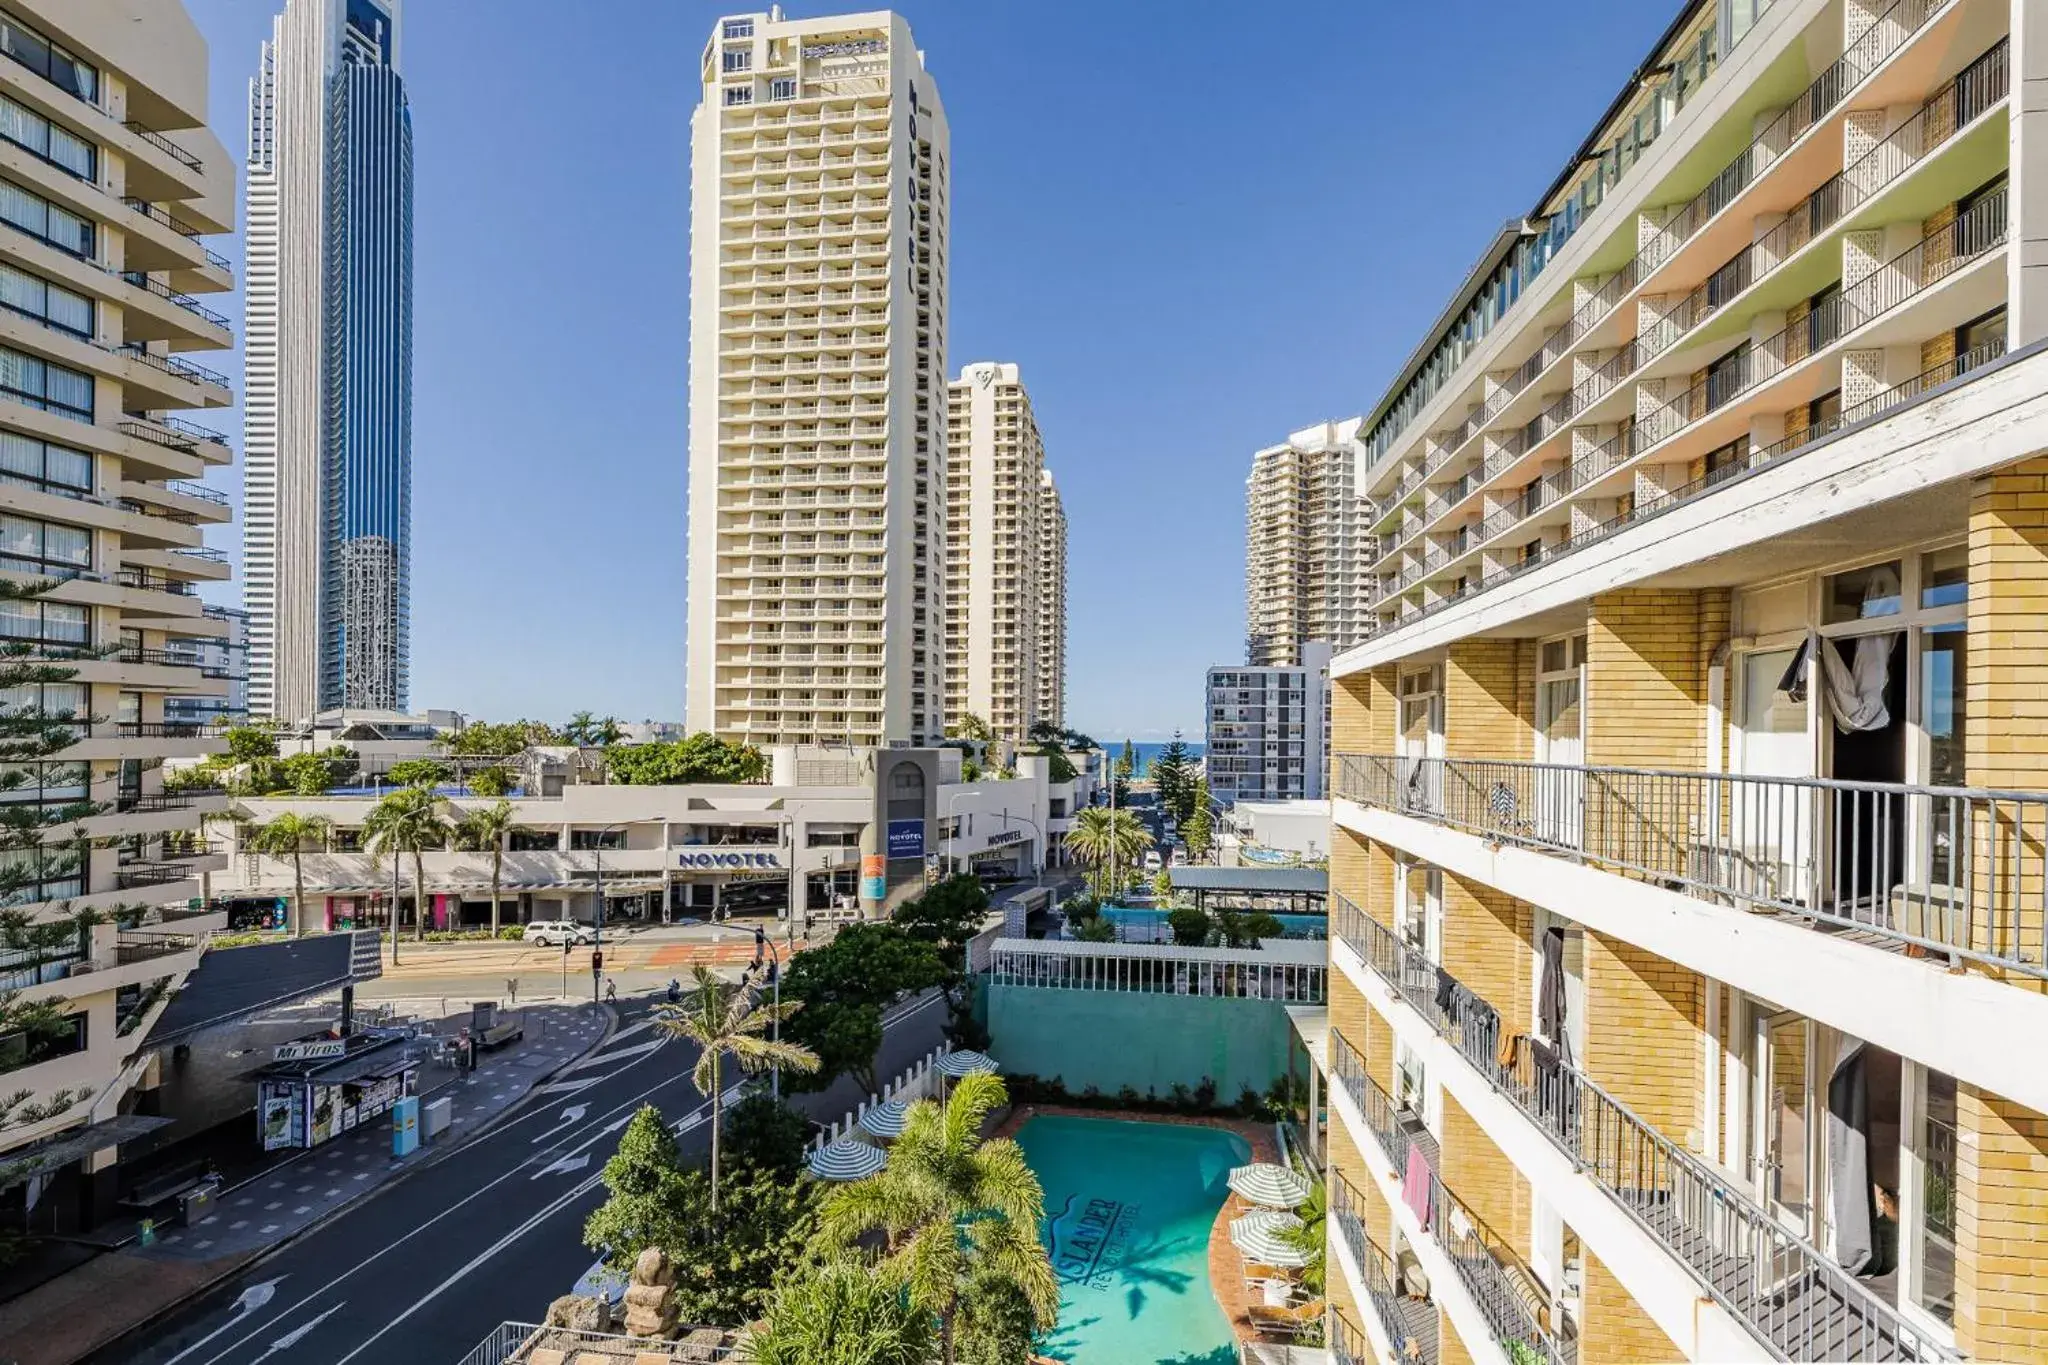 Property building in Bunk Surfers Paradise